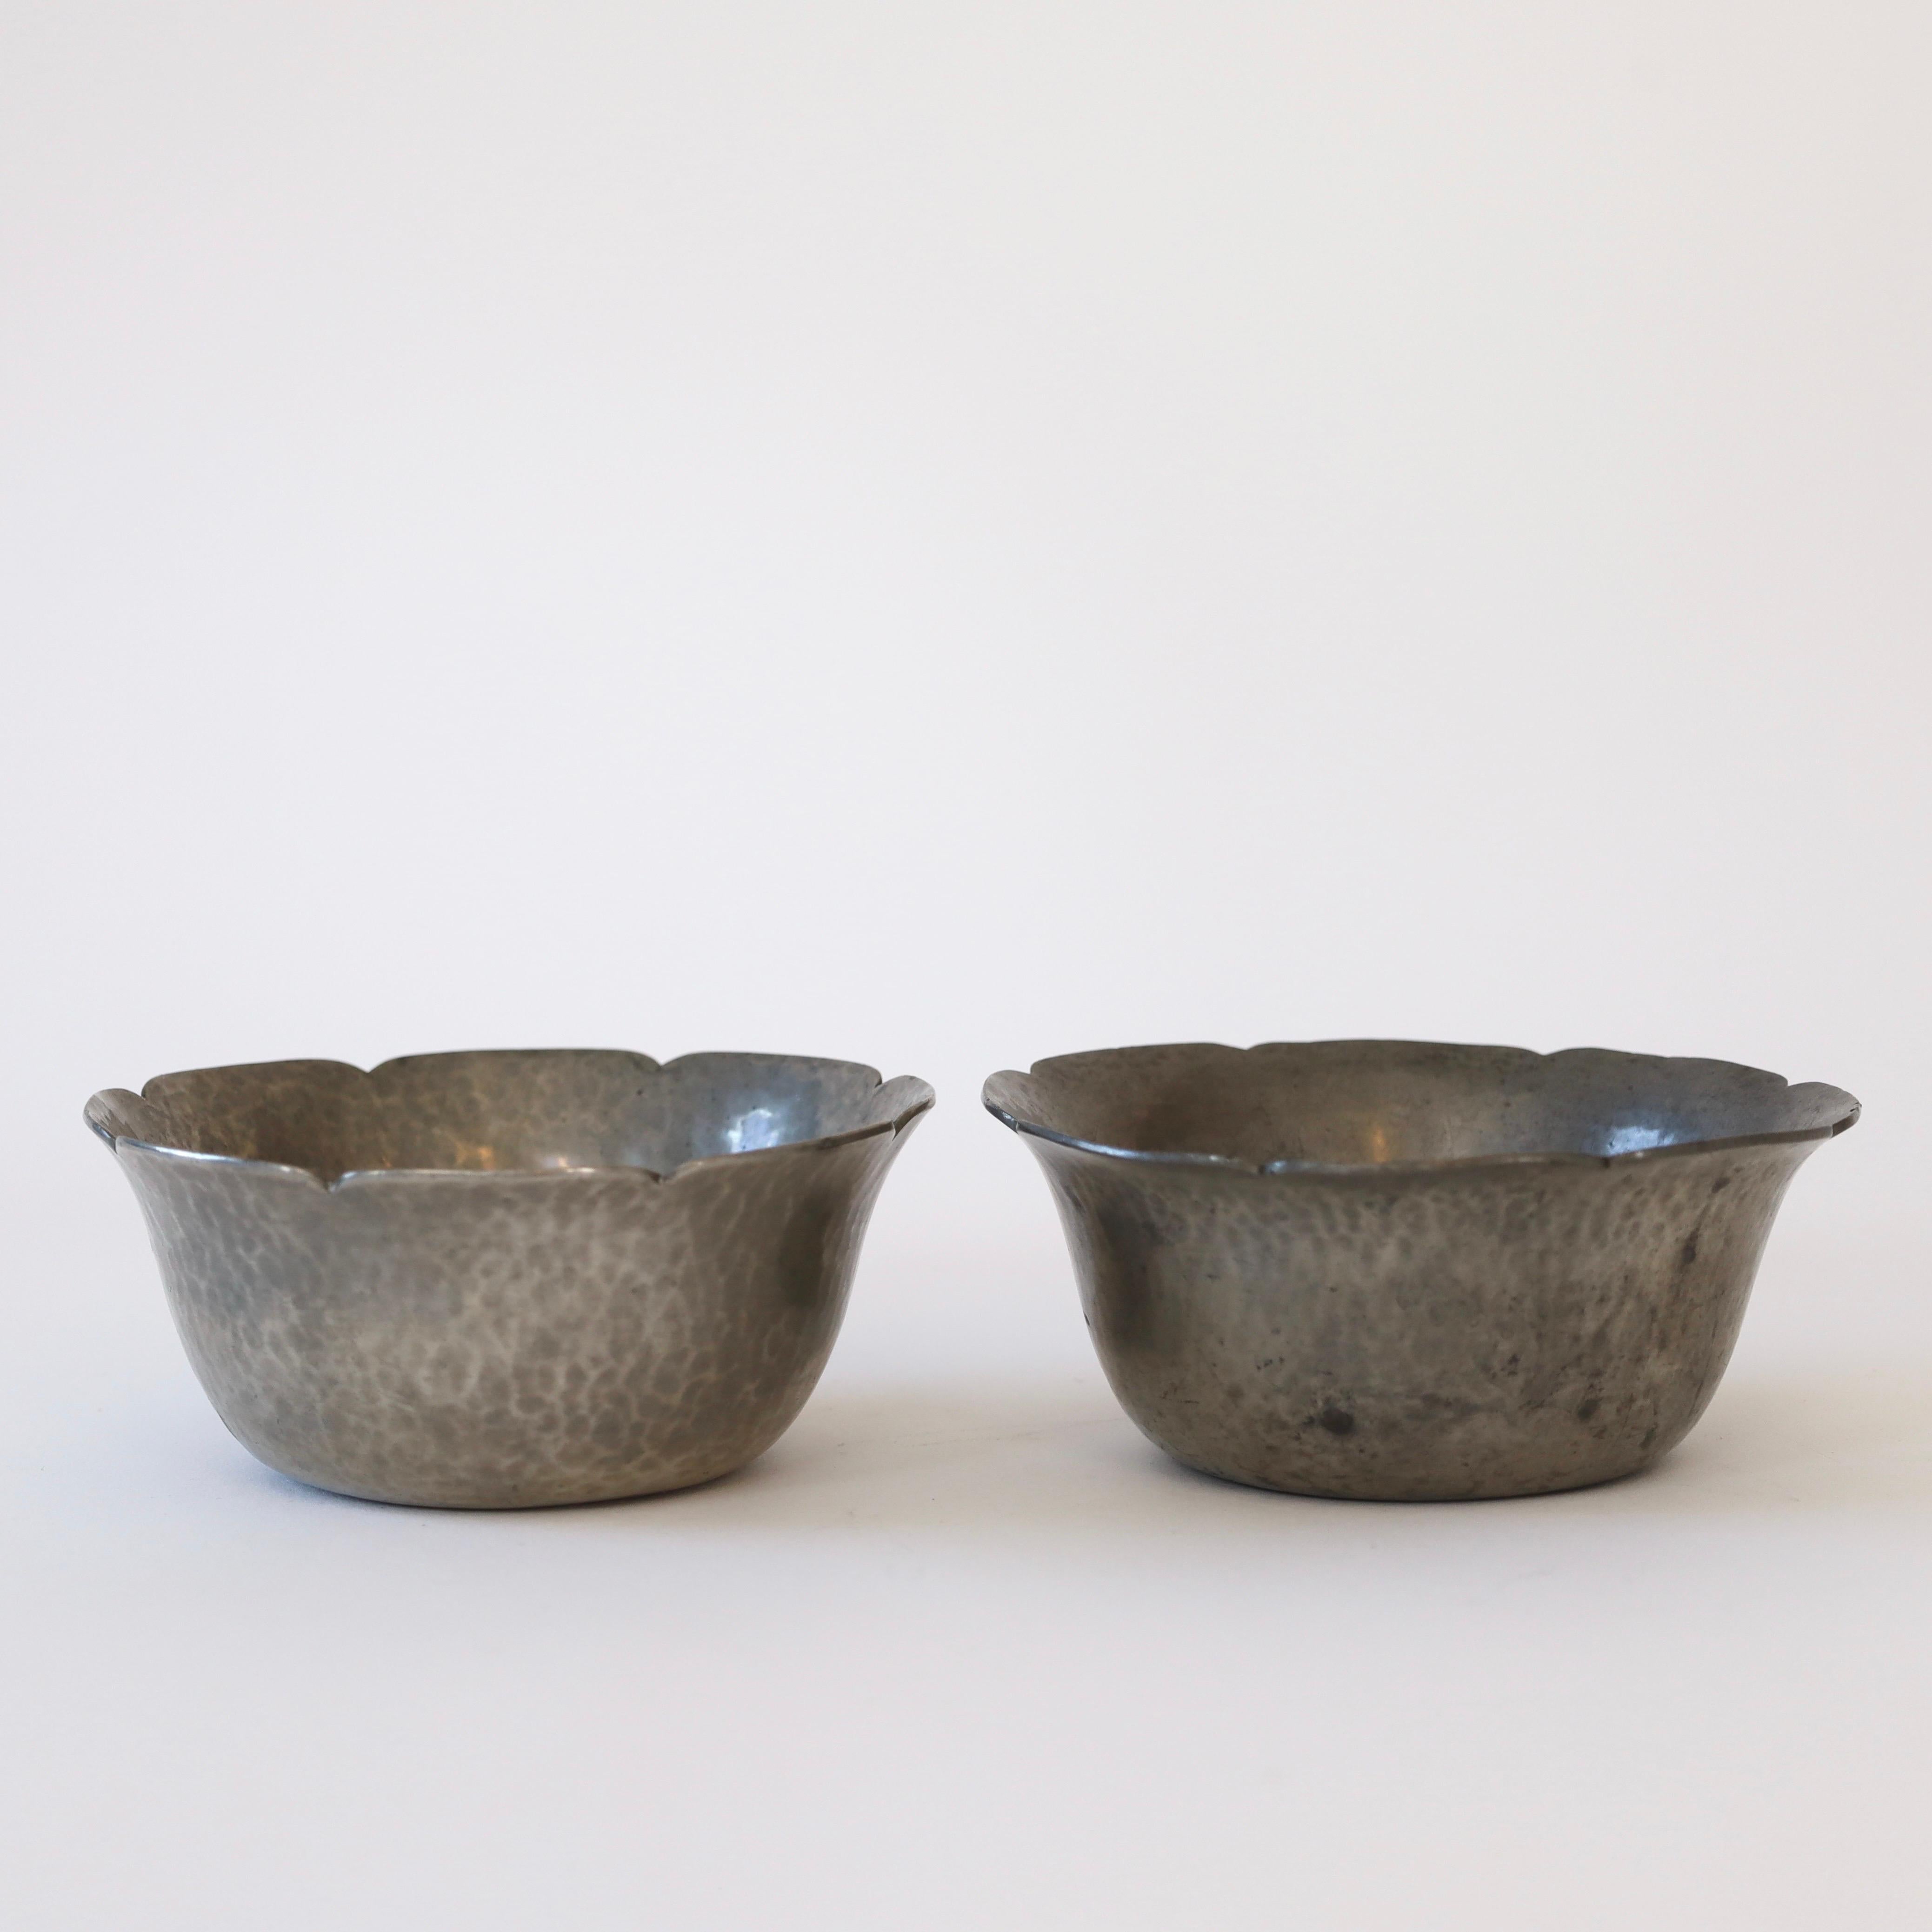 Set of hammered pewter bowls by Just Andersen, 1920s, Denmark In Fair Condition For Sale In Værløse, DK